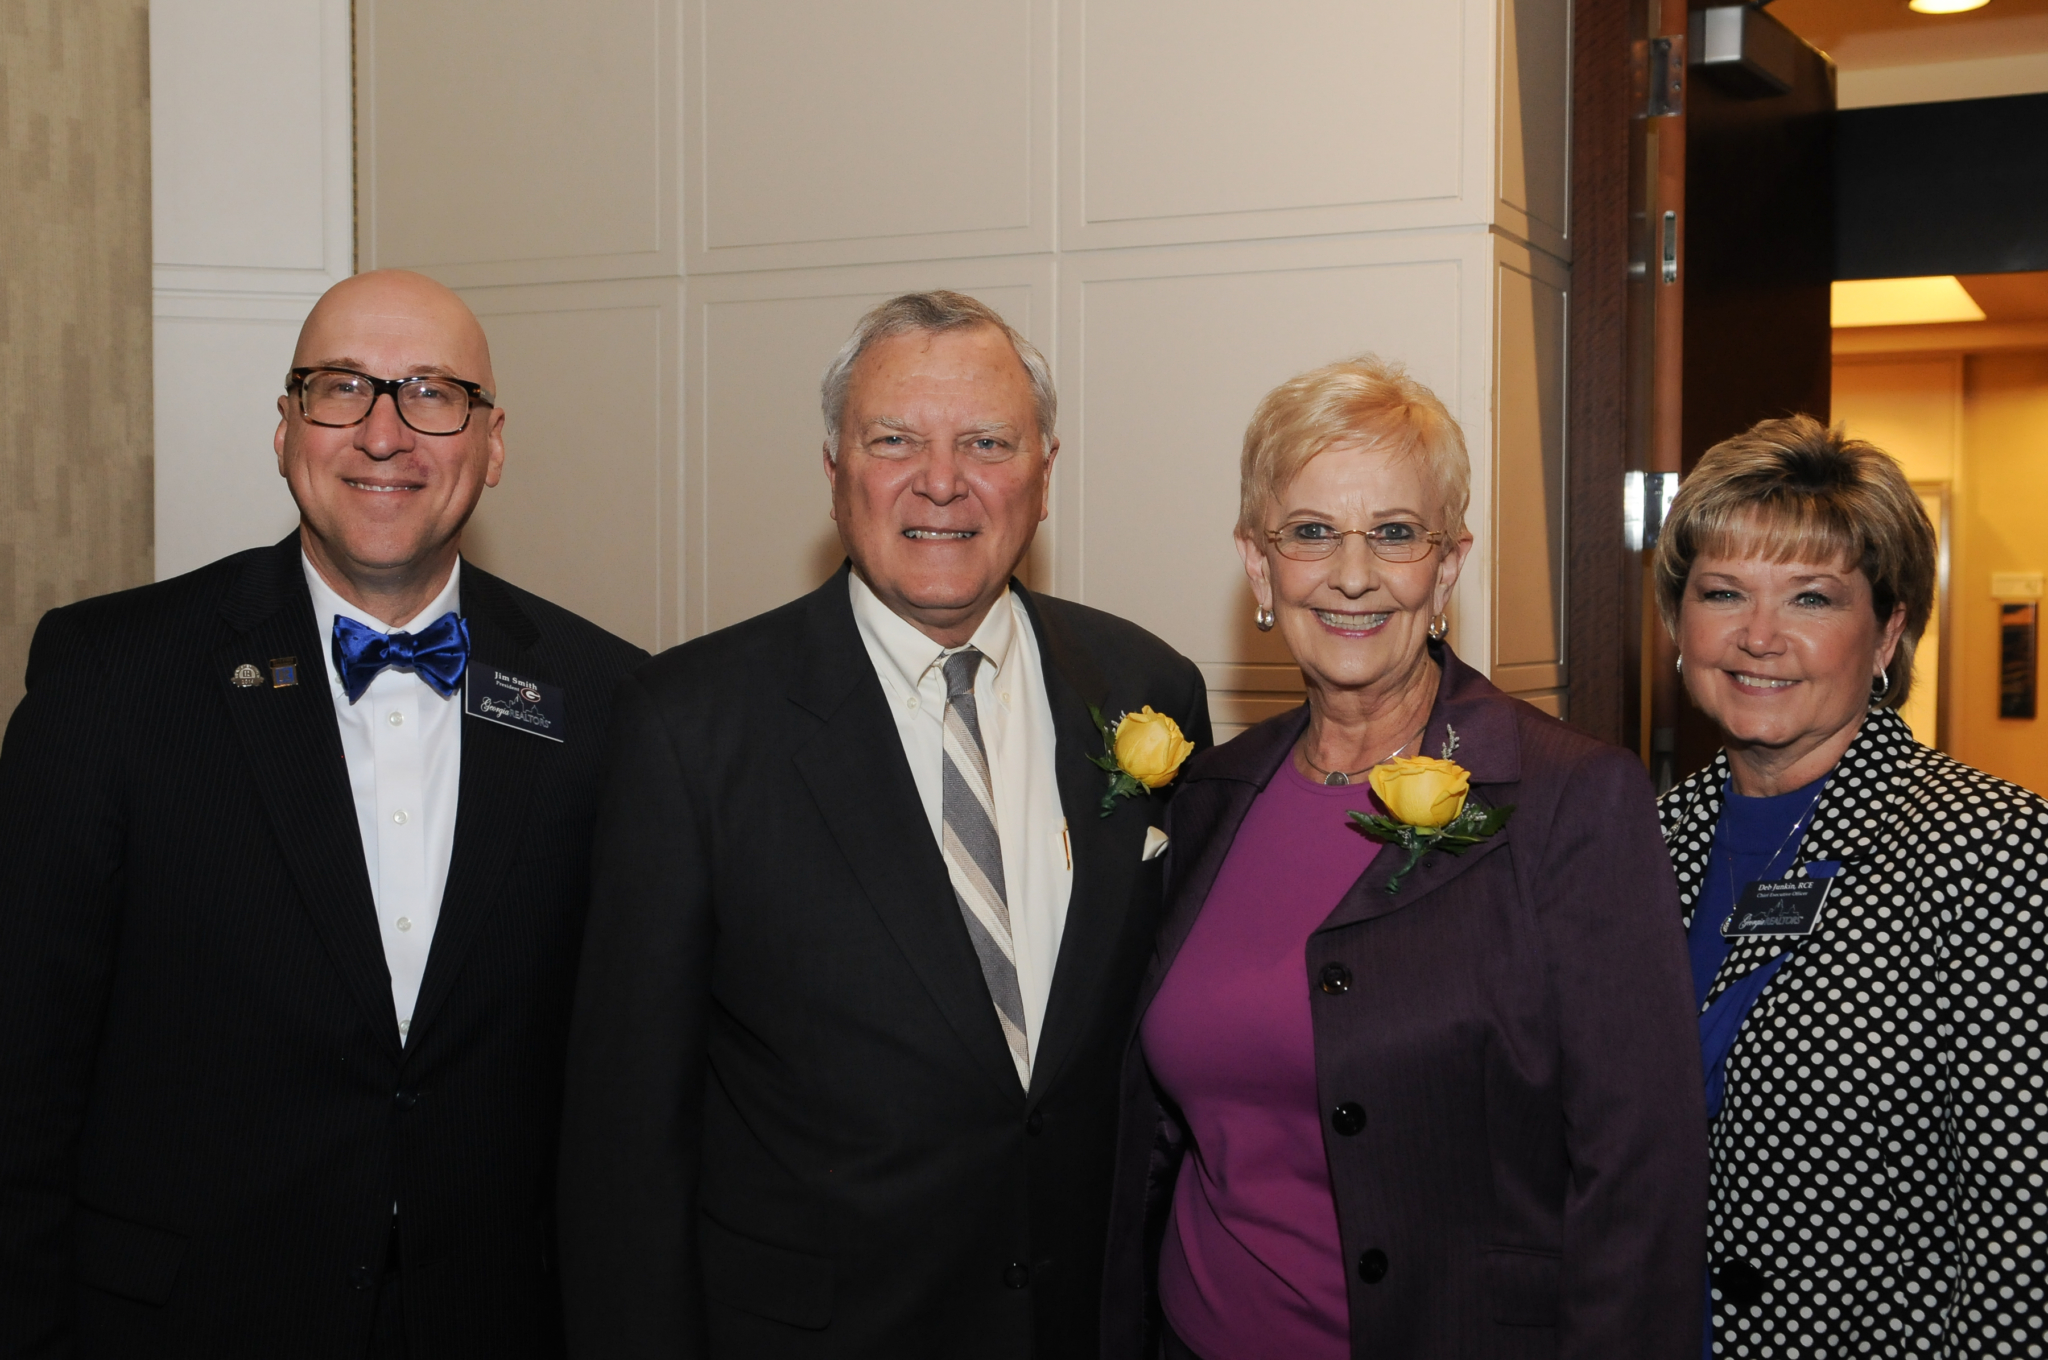 Jim-Smith-Deb-Junkin-Governor-Nathan-Deal-and-Lady-Sandra-Deal.jpg